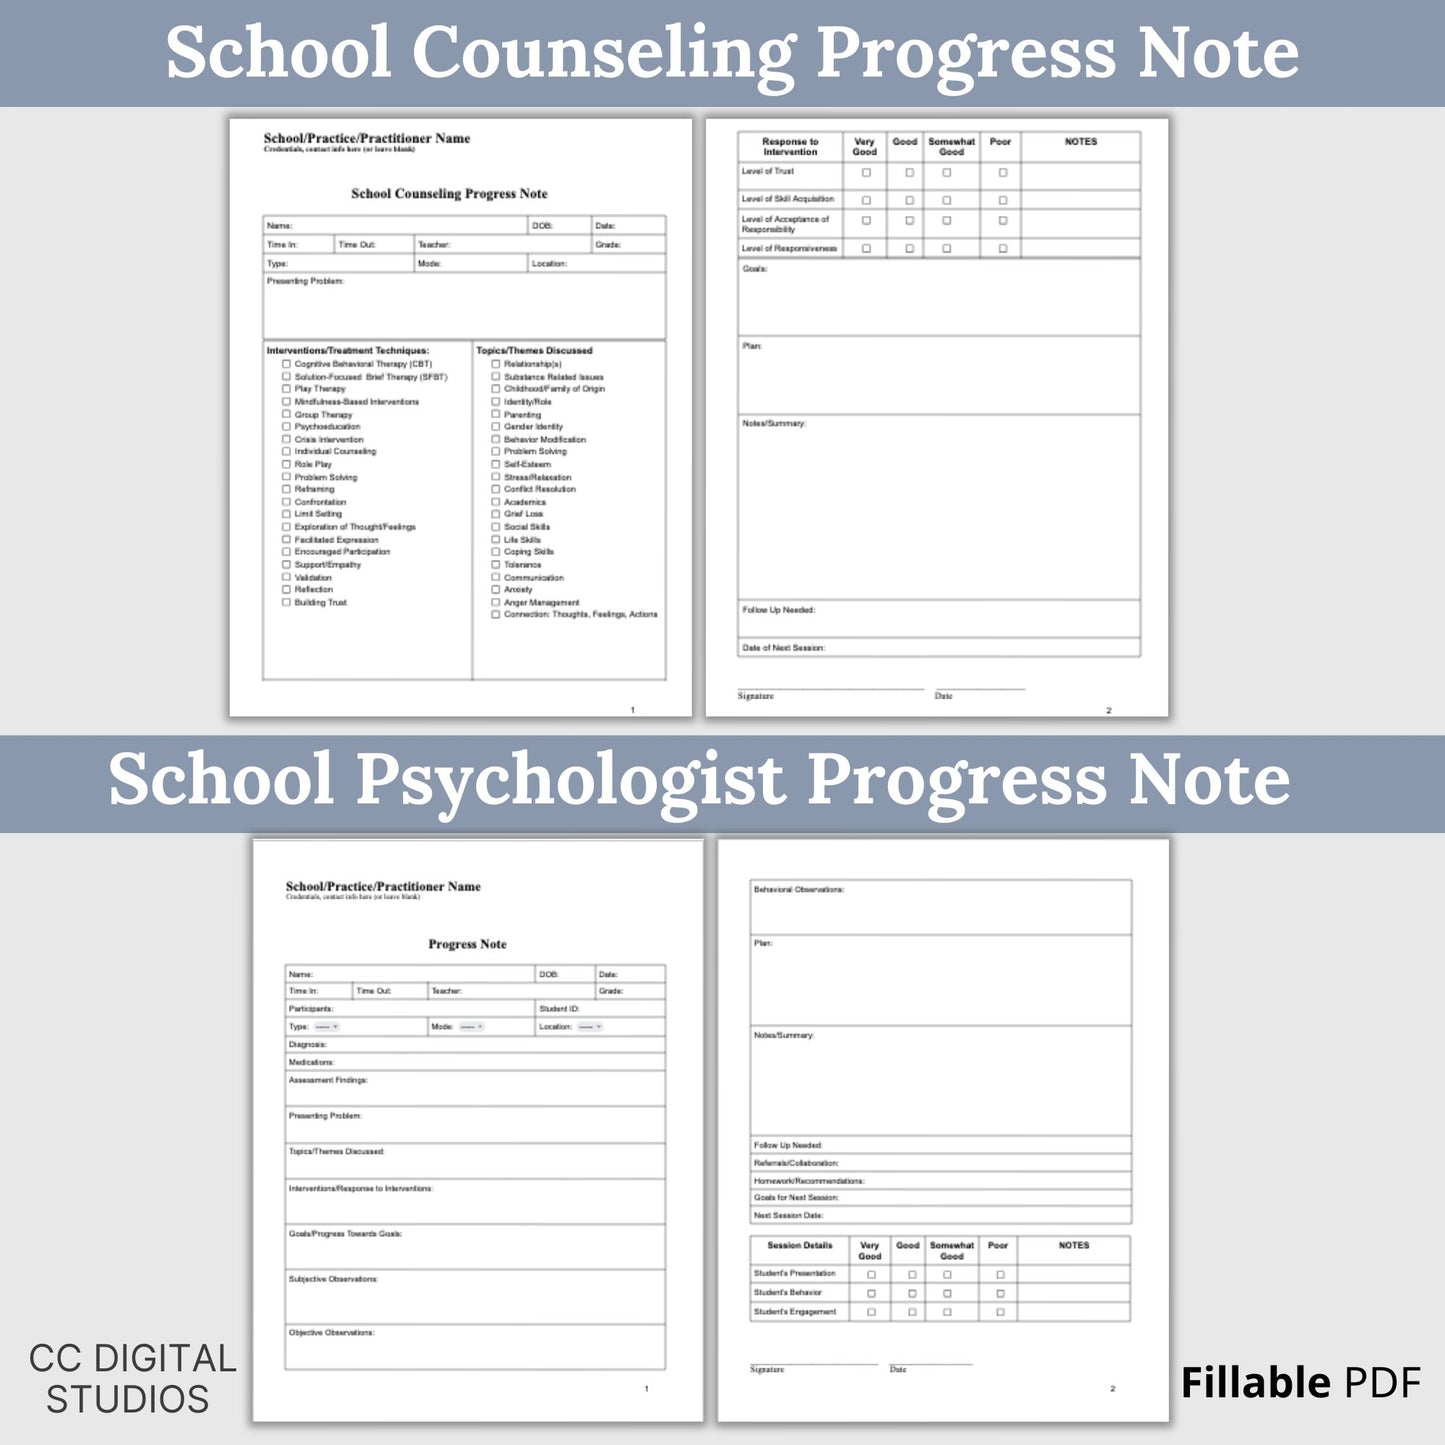 School Counselor Therapy Bundle, School Psychologist Progress Notes, School Social Worker Student Intake Form, Psychology Therapy Notes, social work, therapist notes, therapist planner